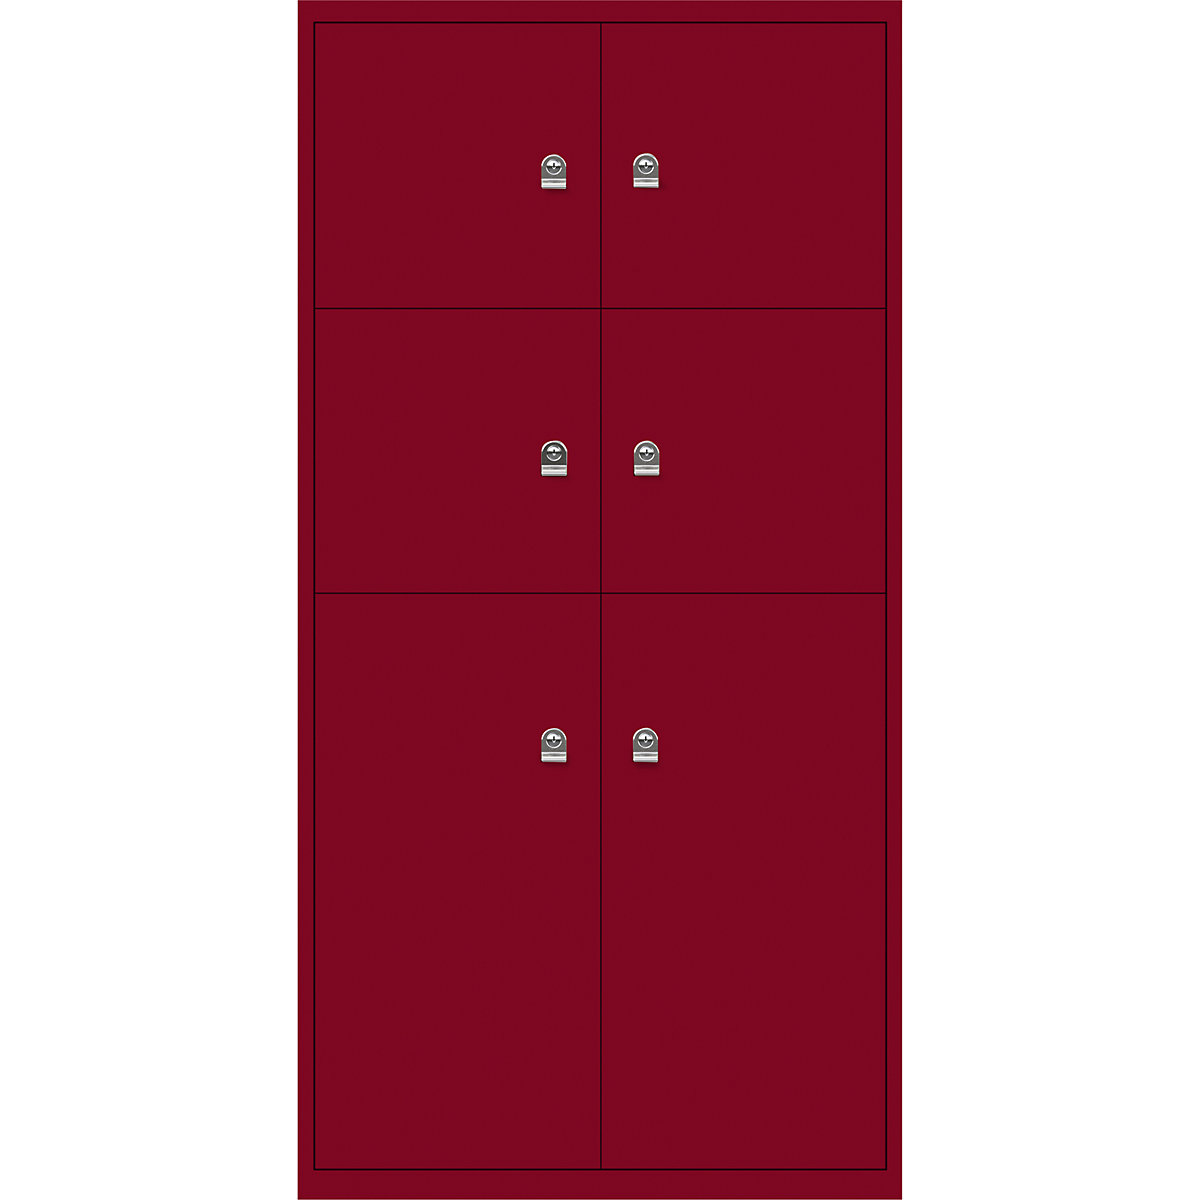 LateralFile™ lodge – BISLEY, with 6 lockable compartments, height 4 x 375 mm, 2 x 755 mm, cardinal red-25